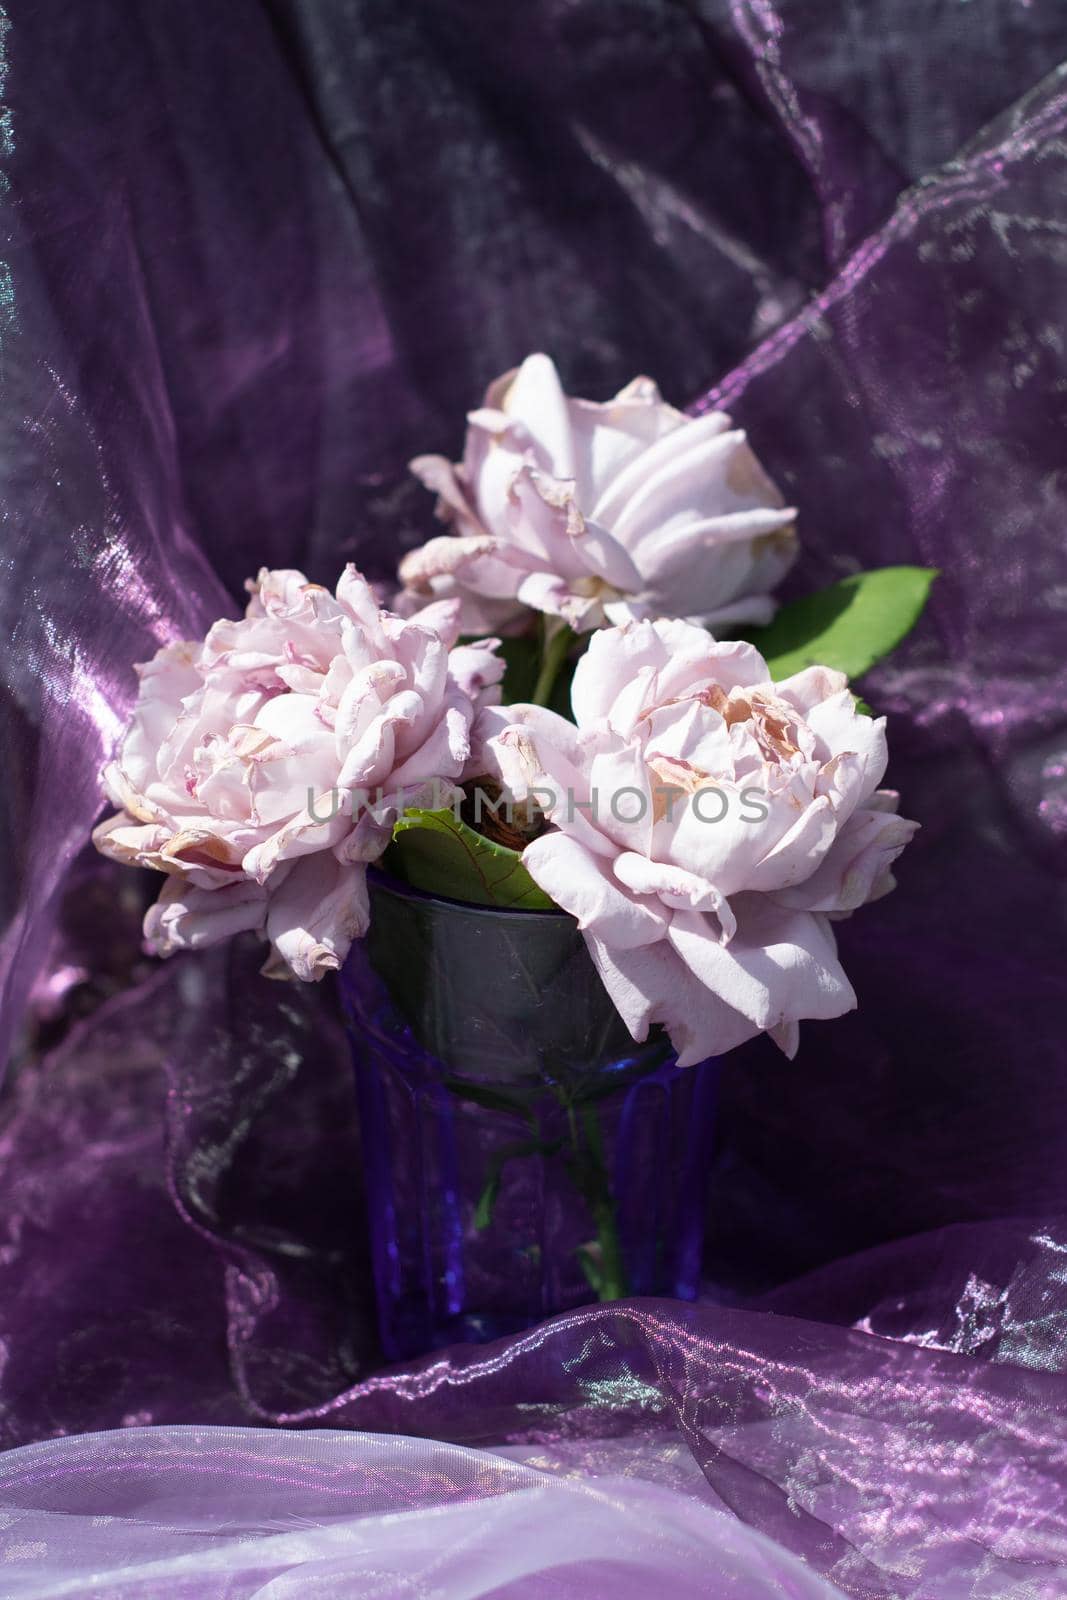 lilac roses in a blue glass on a chair against a background of purple chiffon by KaterinaDalemans